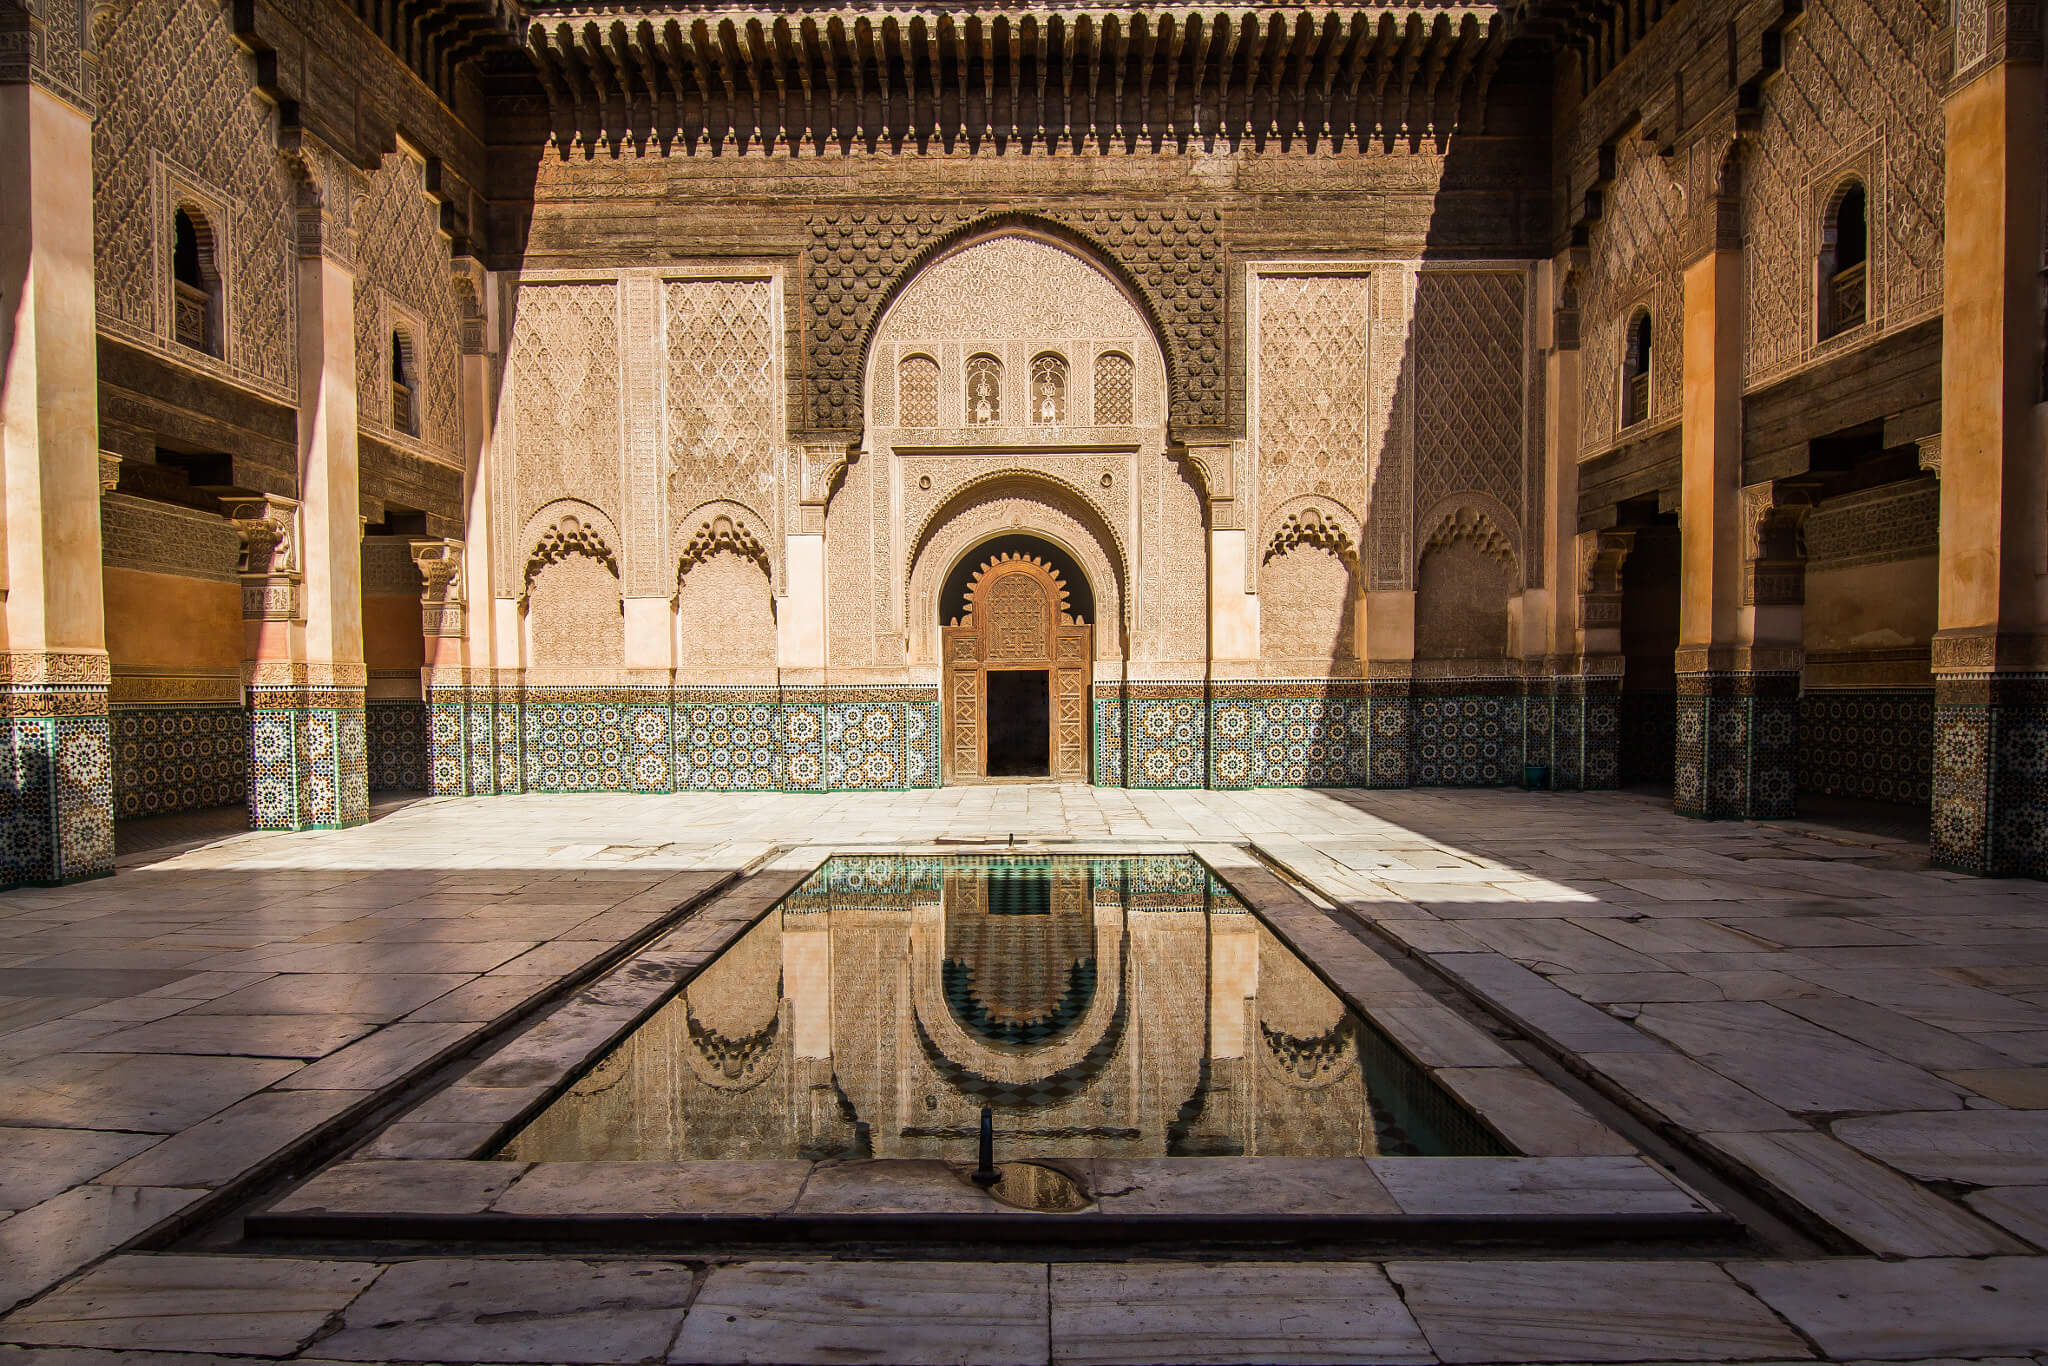 Explore the intricate architecture and serene courtyards of this historic Islamic school.